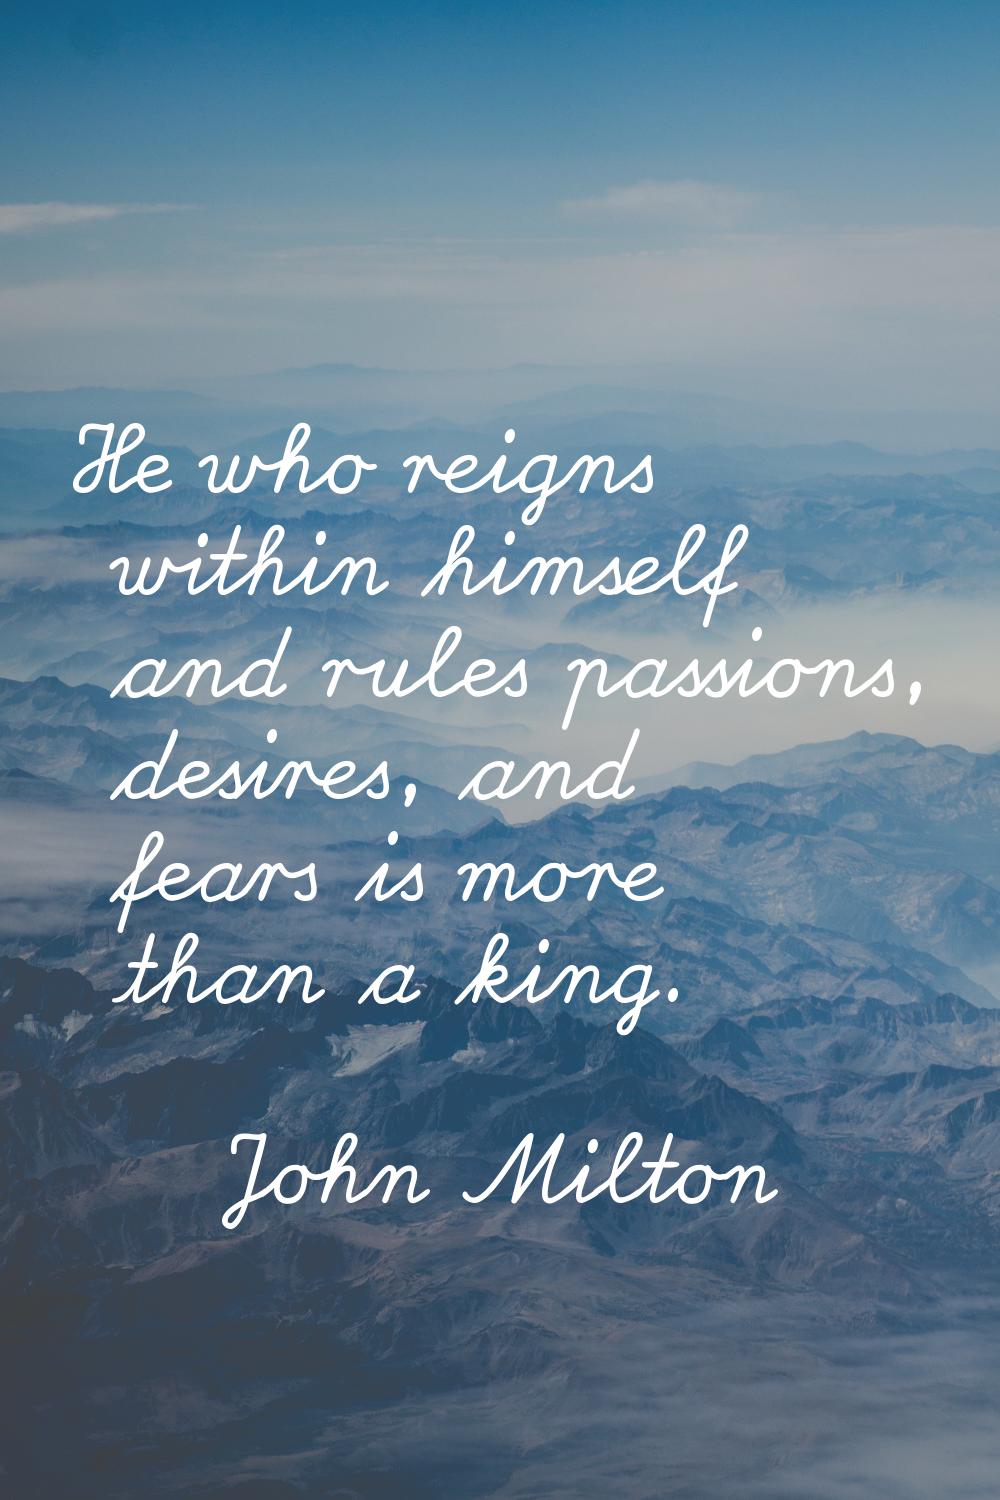 He who reigns within himself and rules passions, desires, and fears is more than a king.